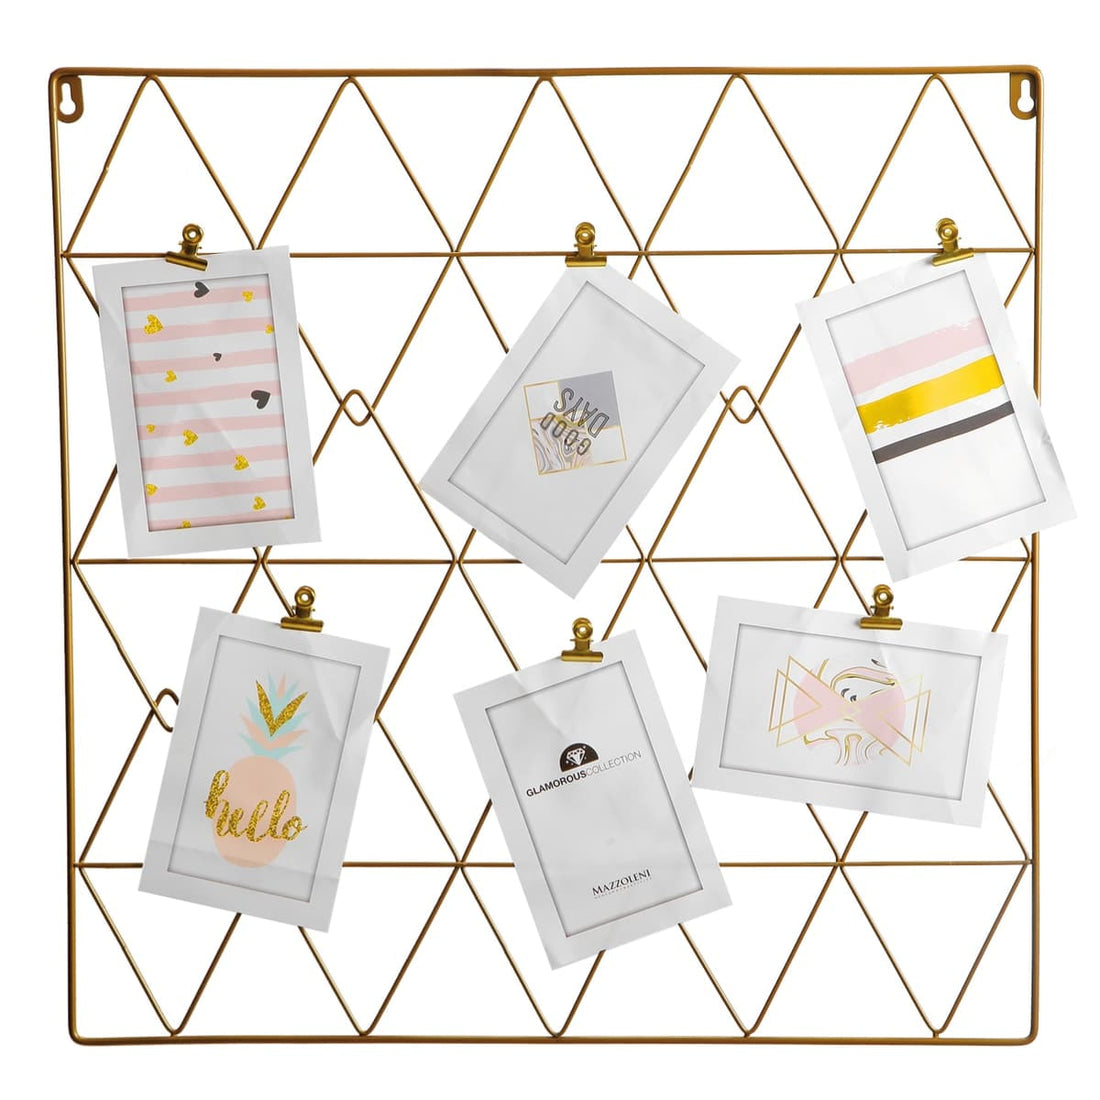 6-PLACE GOLD METAL GRID NOTICE BOARD 50X50C, - best price from Maltashopper.com BR480009922